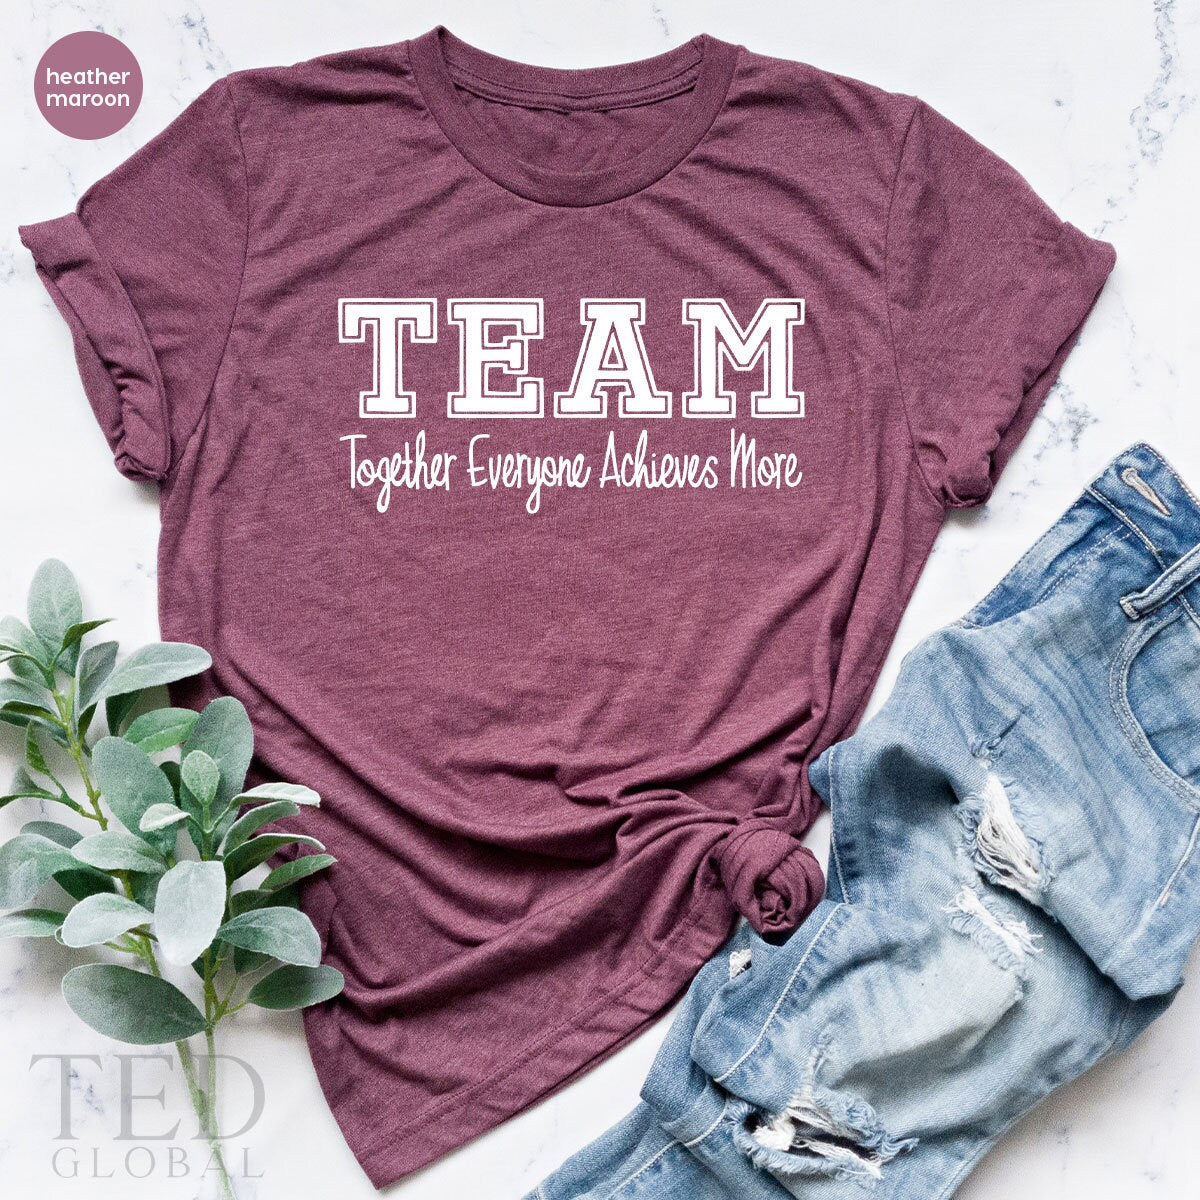 Team T Shirt, Teamwork TShirt, Custom Team Shirts, Together Everyone Archives More, Sport Team Tee,Gift For Employee From Boss, Motivational - Fastdeliverytees.com